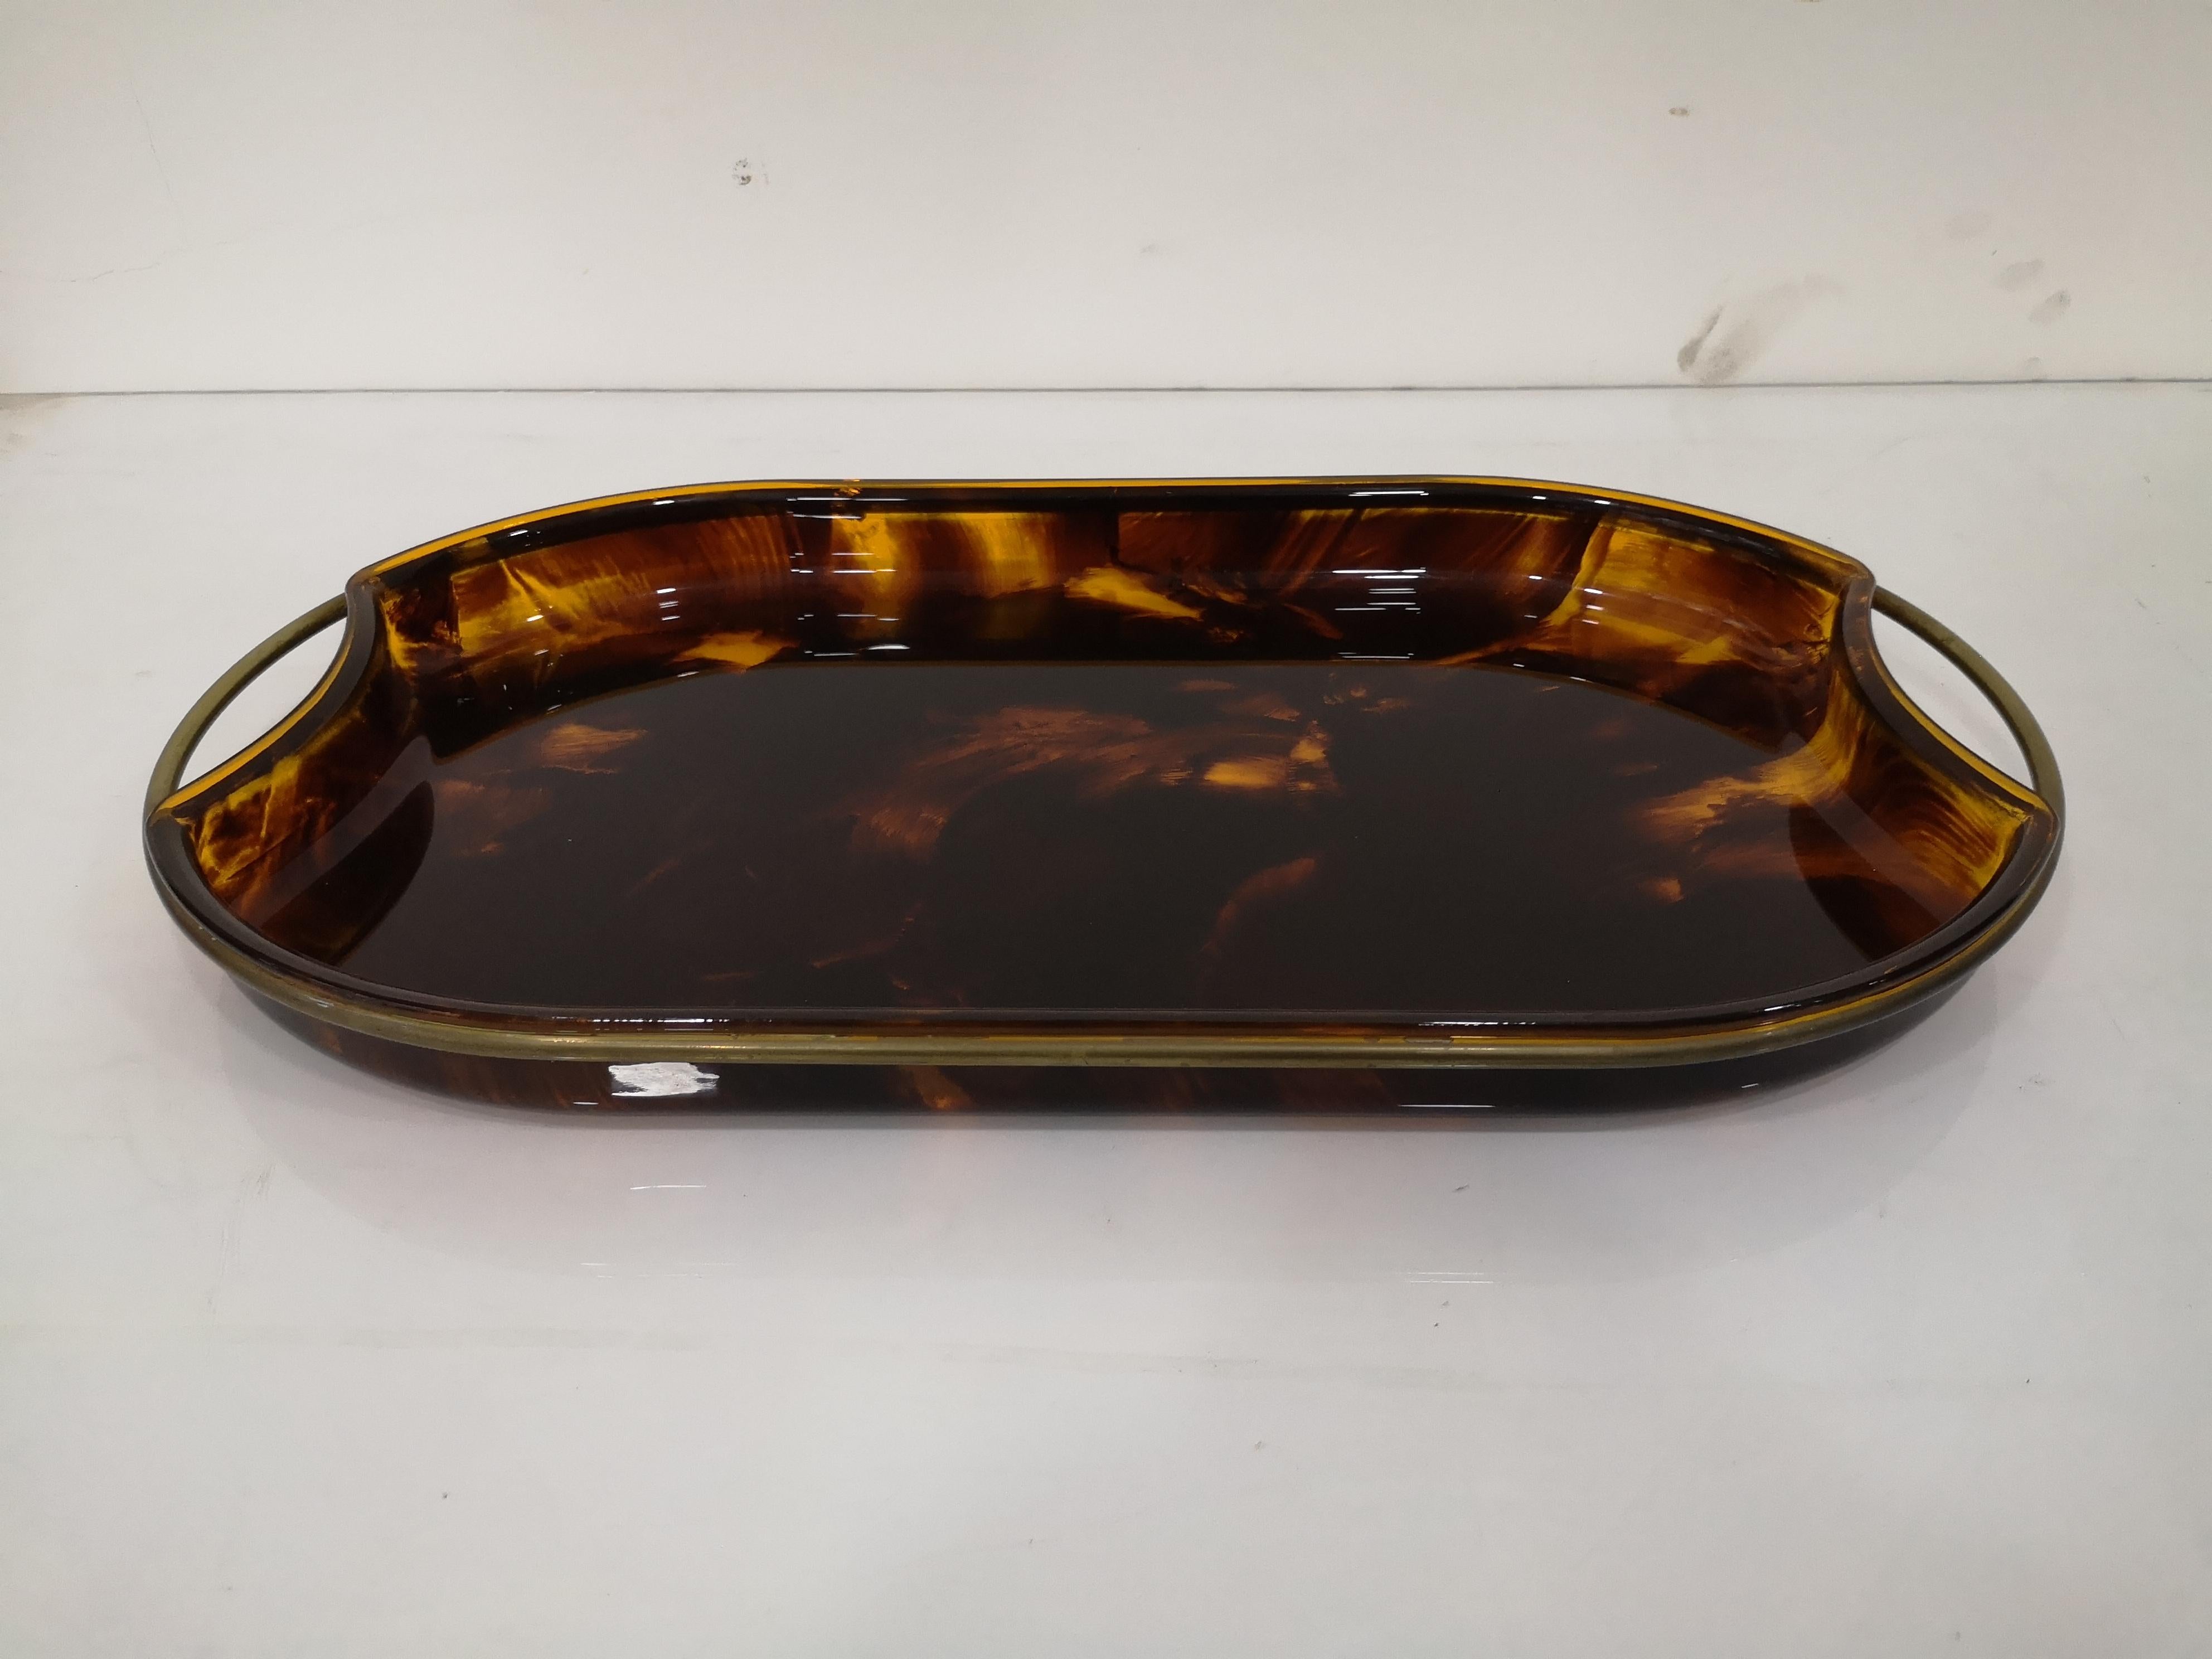 Oval serving tray made of acrylic glass and tortoise effect with brass handles
1970s attributed to Guzzini
